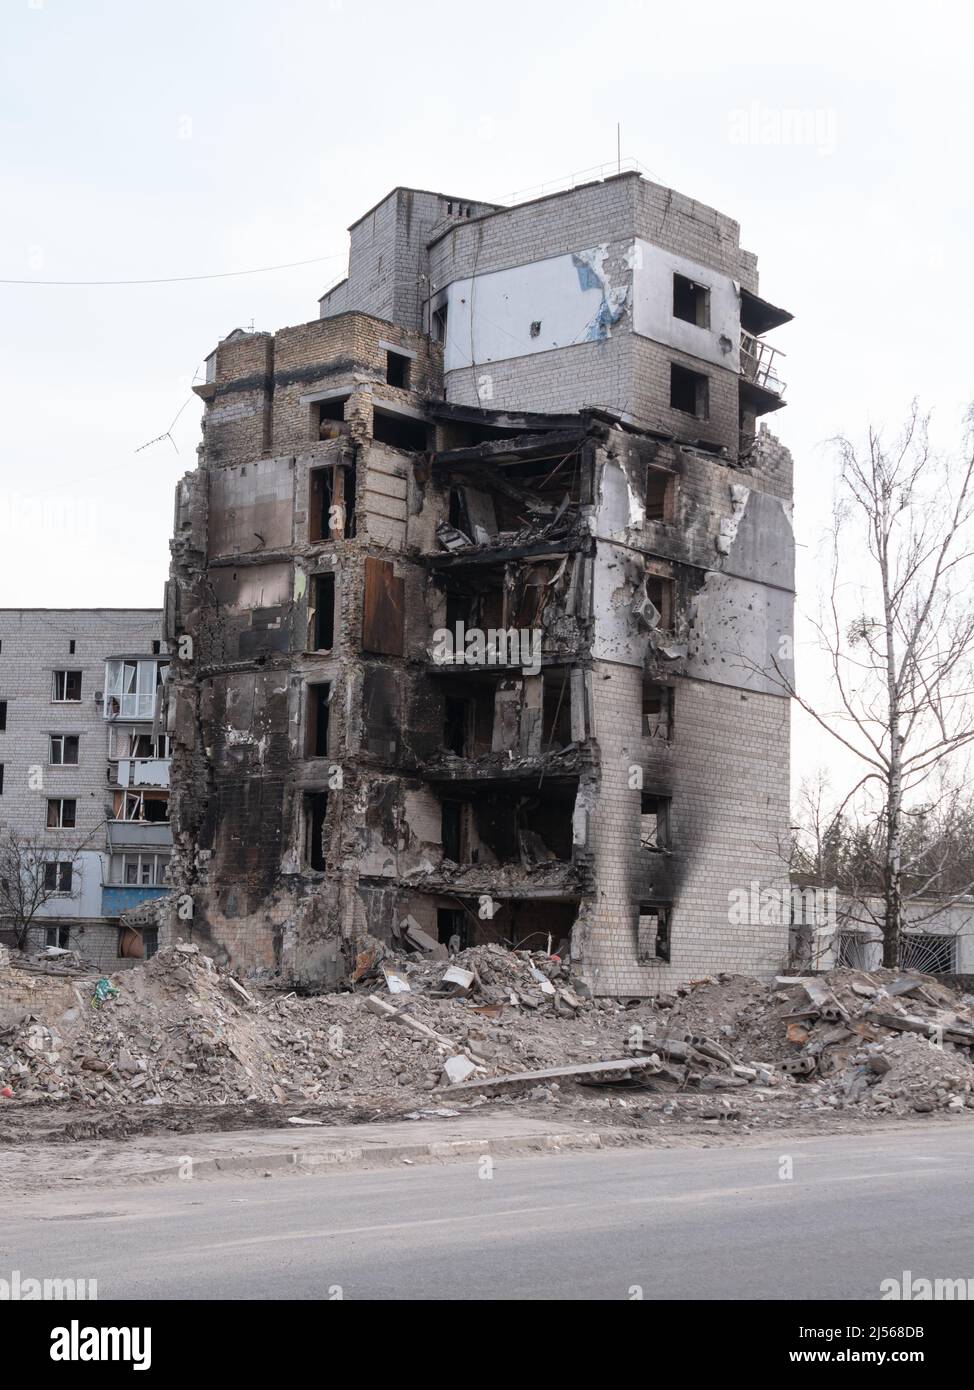 Russia's war against Ukraine. Russian bomb hit civilian buildings. War in Ukraine, ruined building after bombing. estroyed buildings after the bombing, close-up. Bodyanka, Kyiv region, Ukraine 2022 Stock Photo